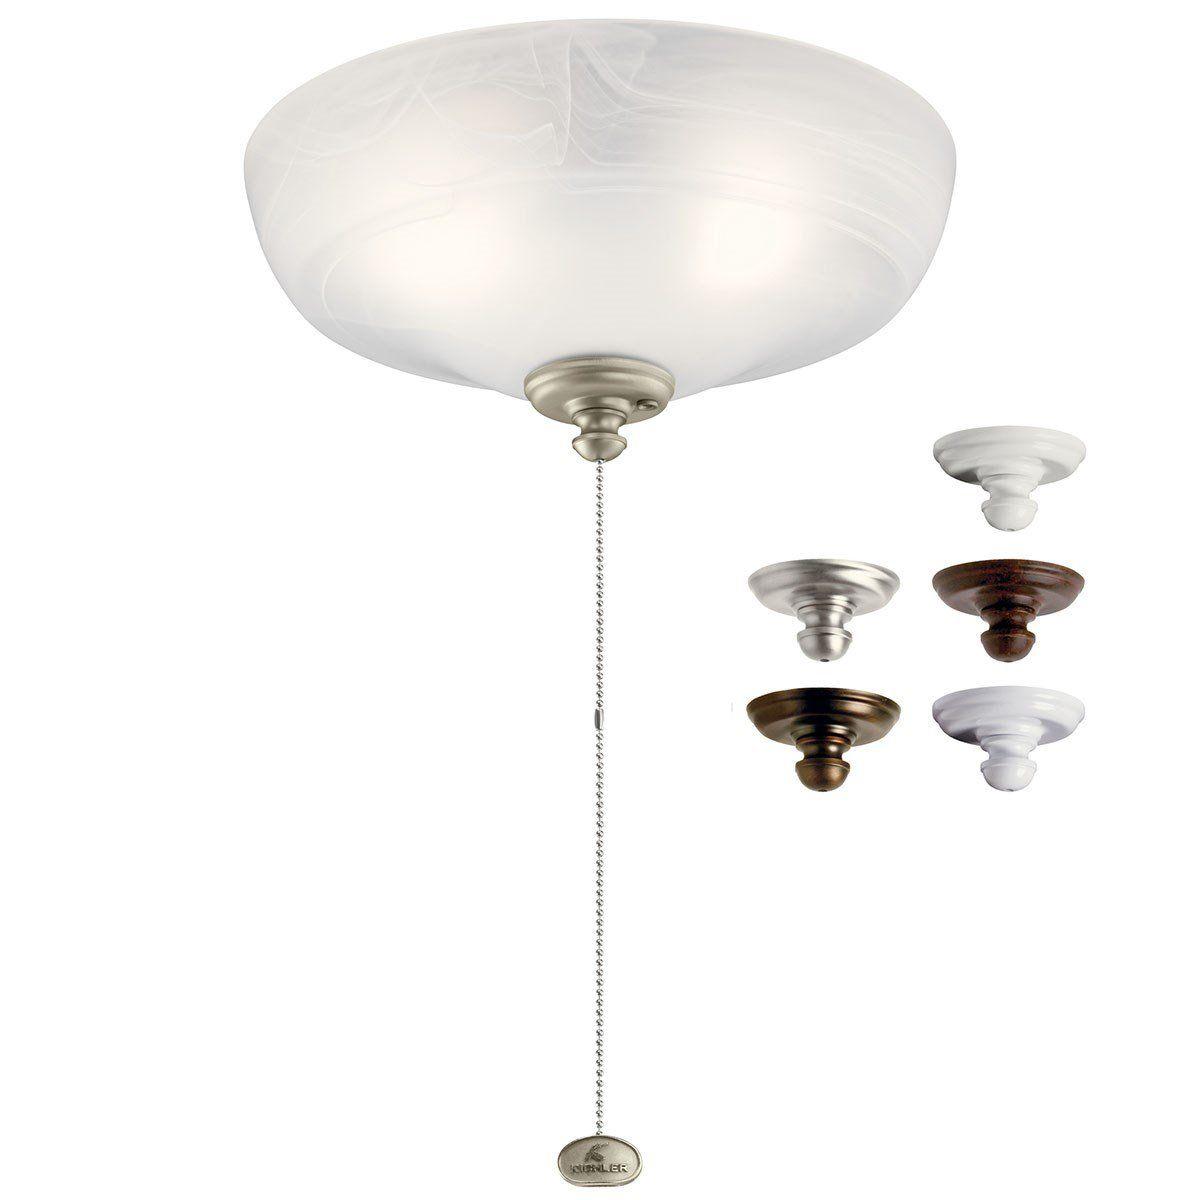 13 Inch Ceiling Fan LED Light Kit With Umber Etched Bowl, Alabaster Swirl Glass